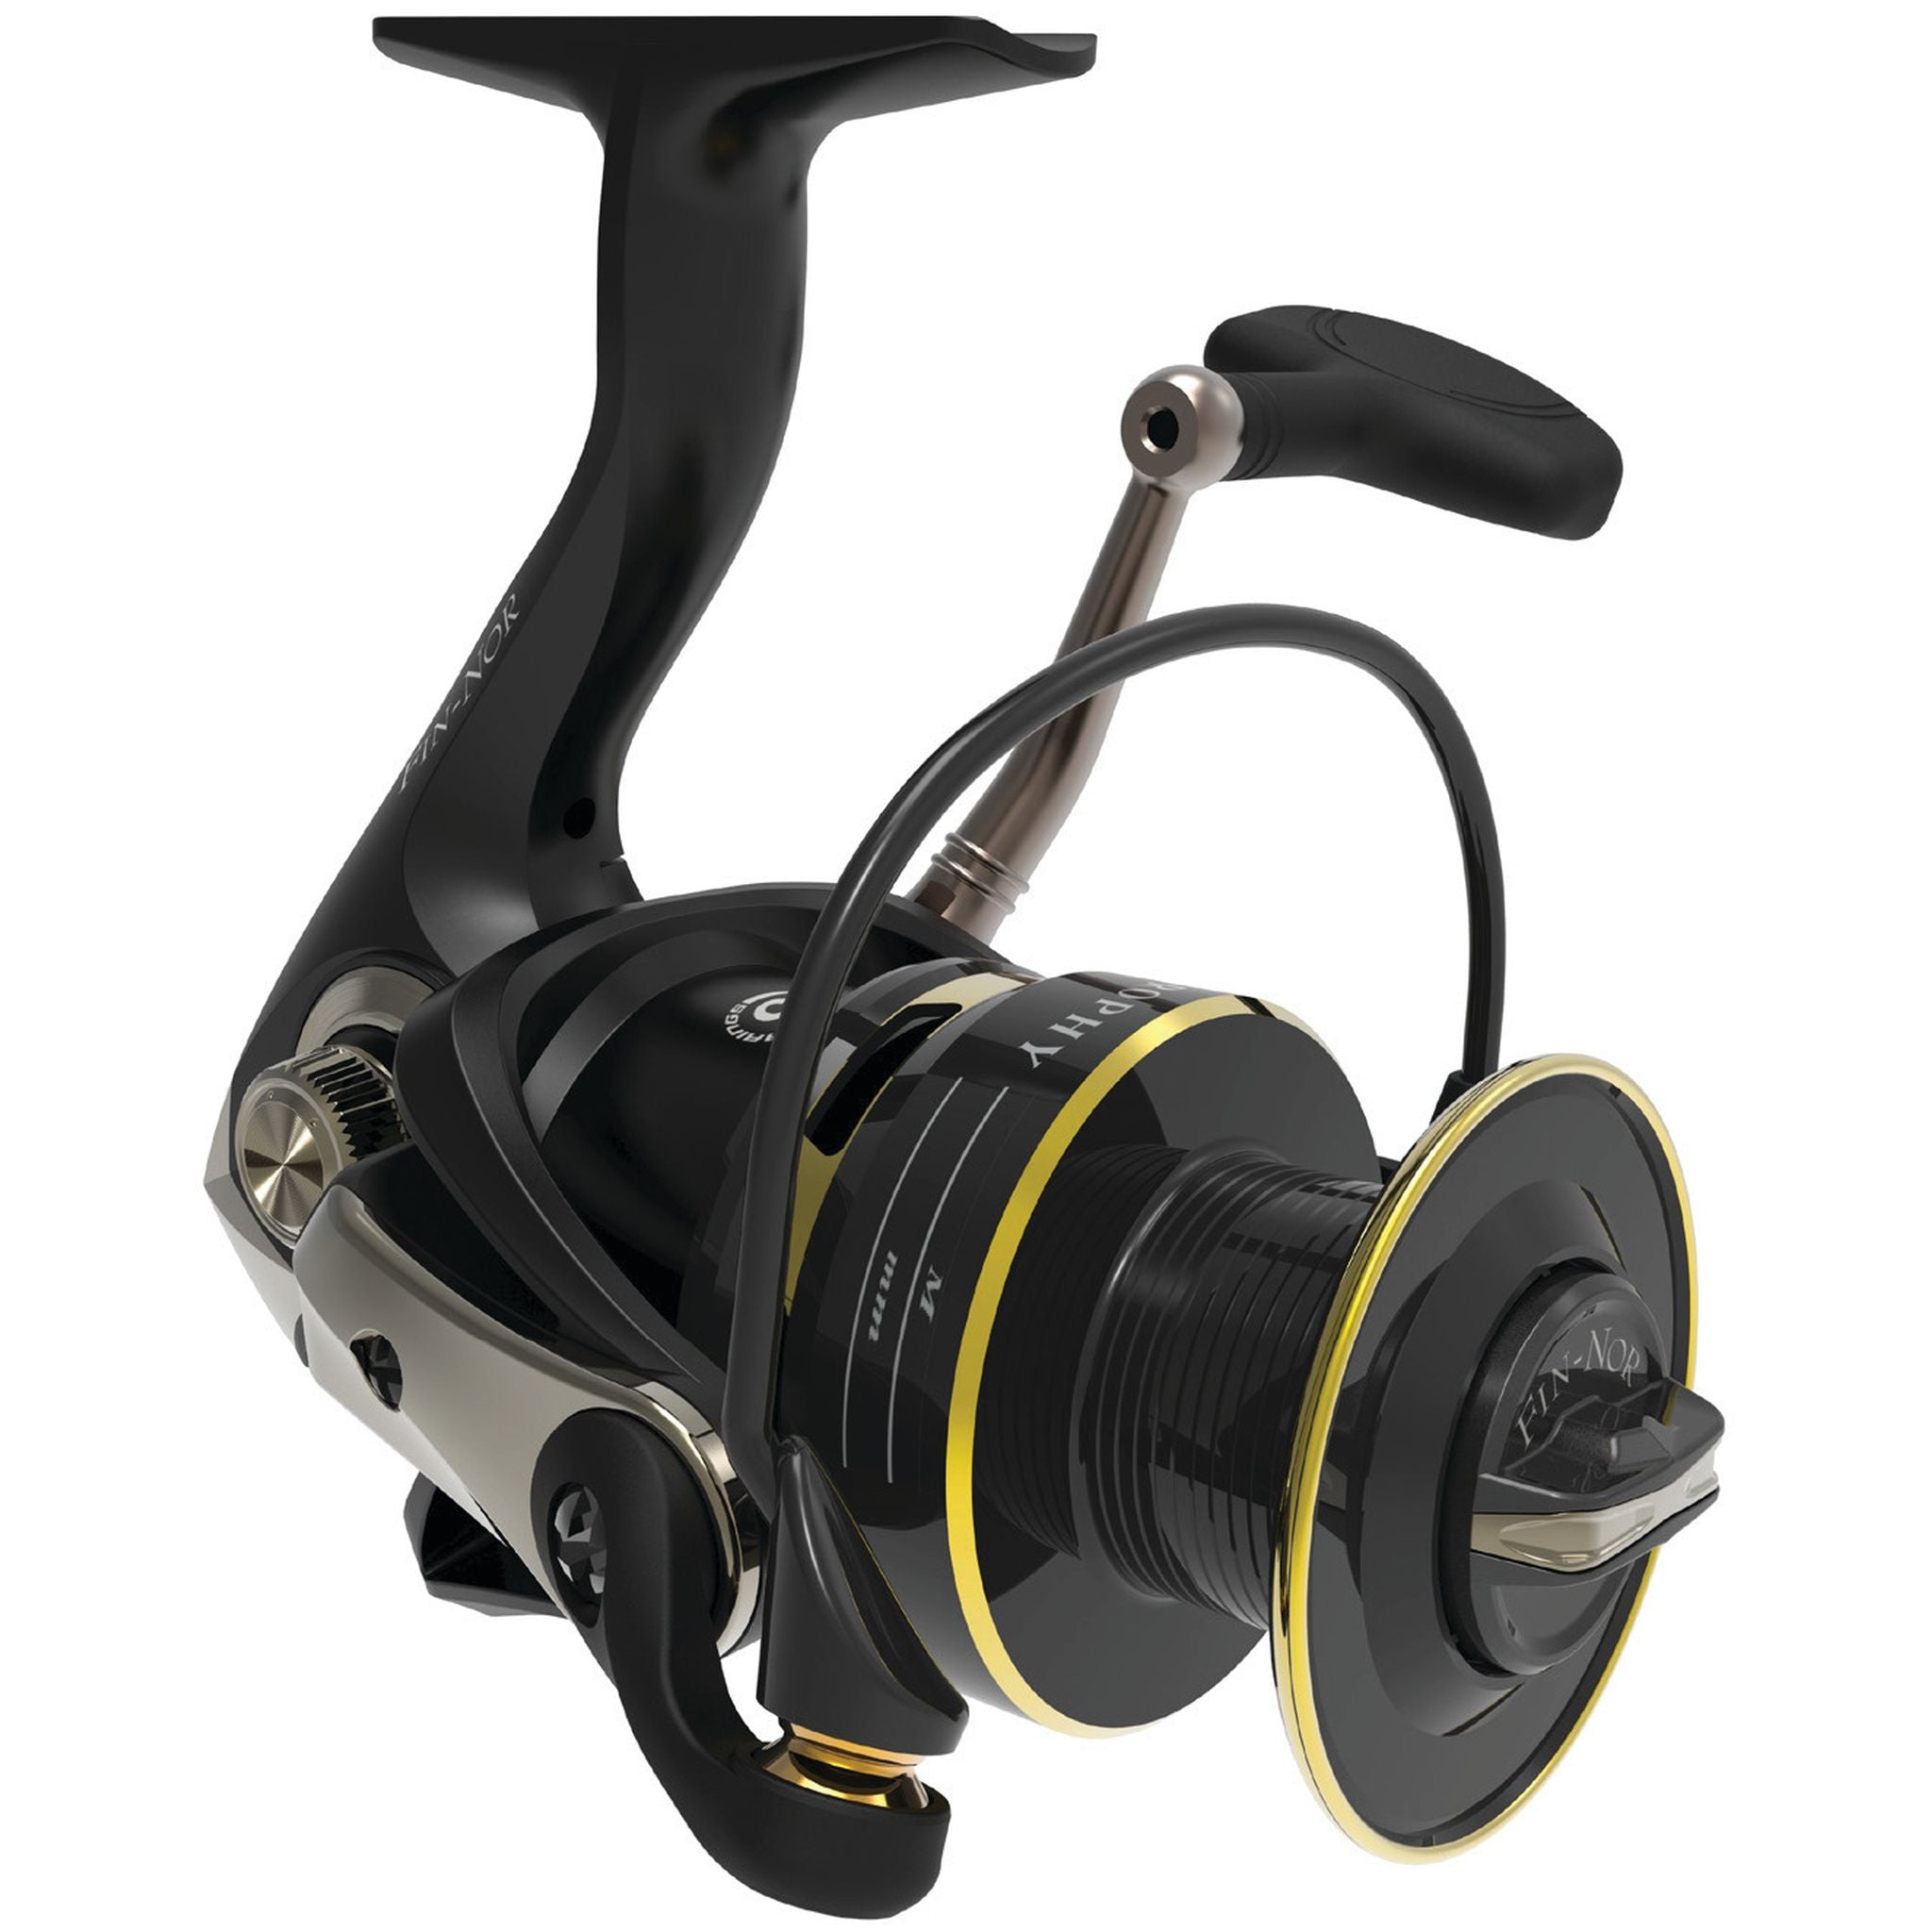 Fin-Nor Trophy TRO40 Spinning Fishing Reel